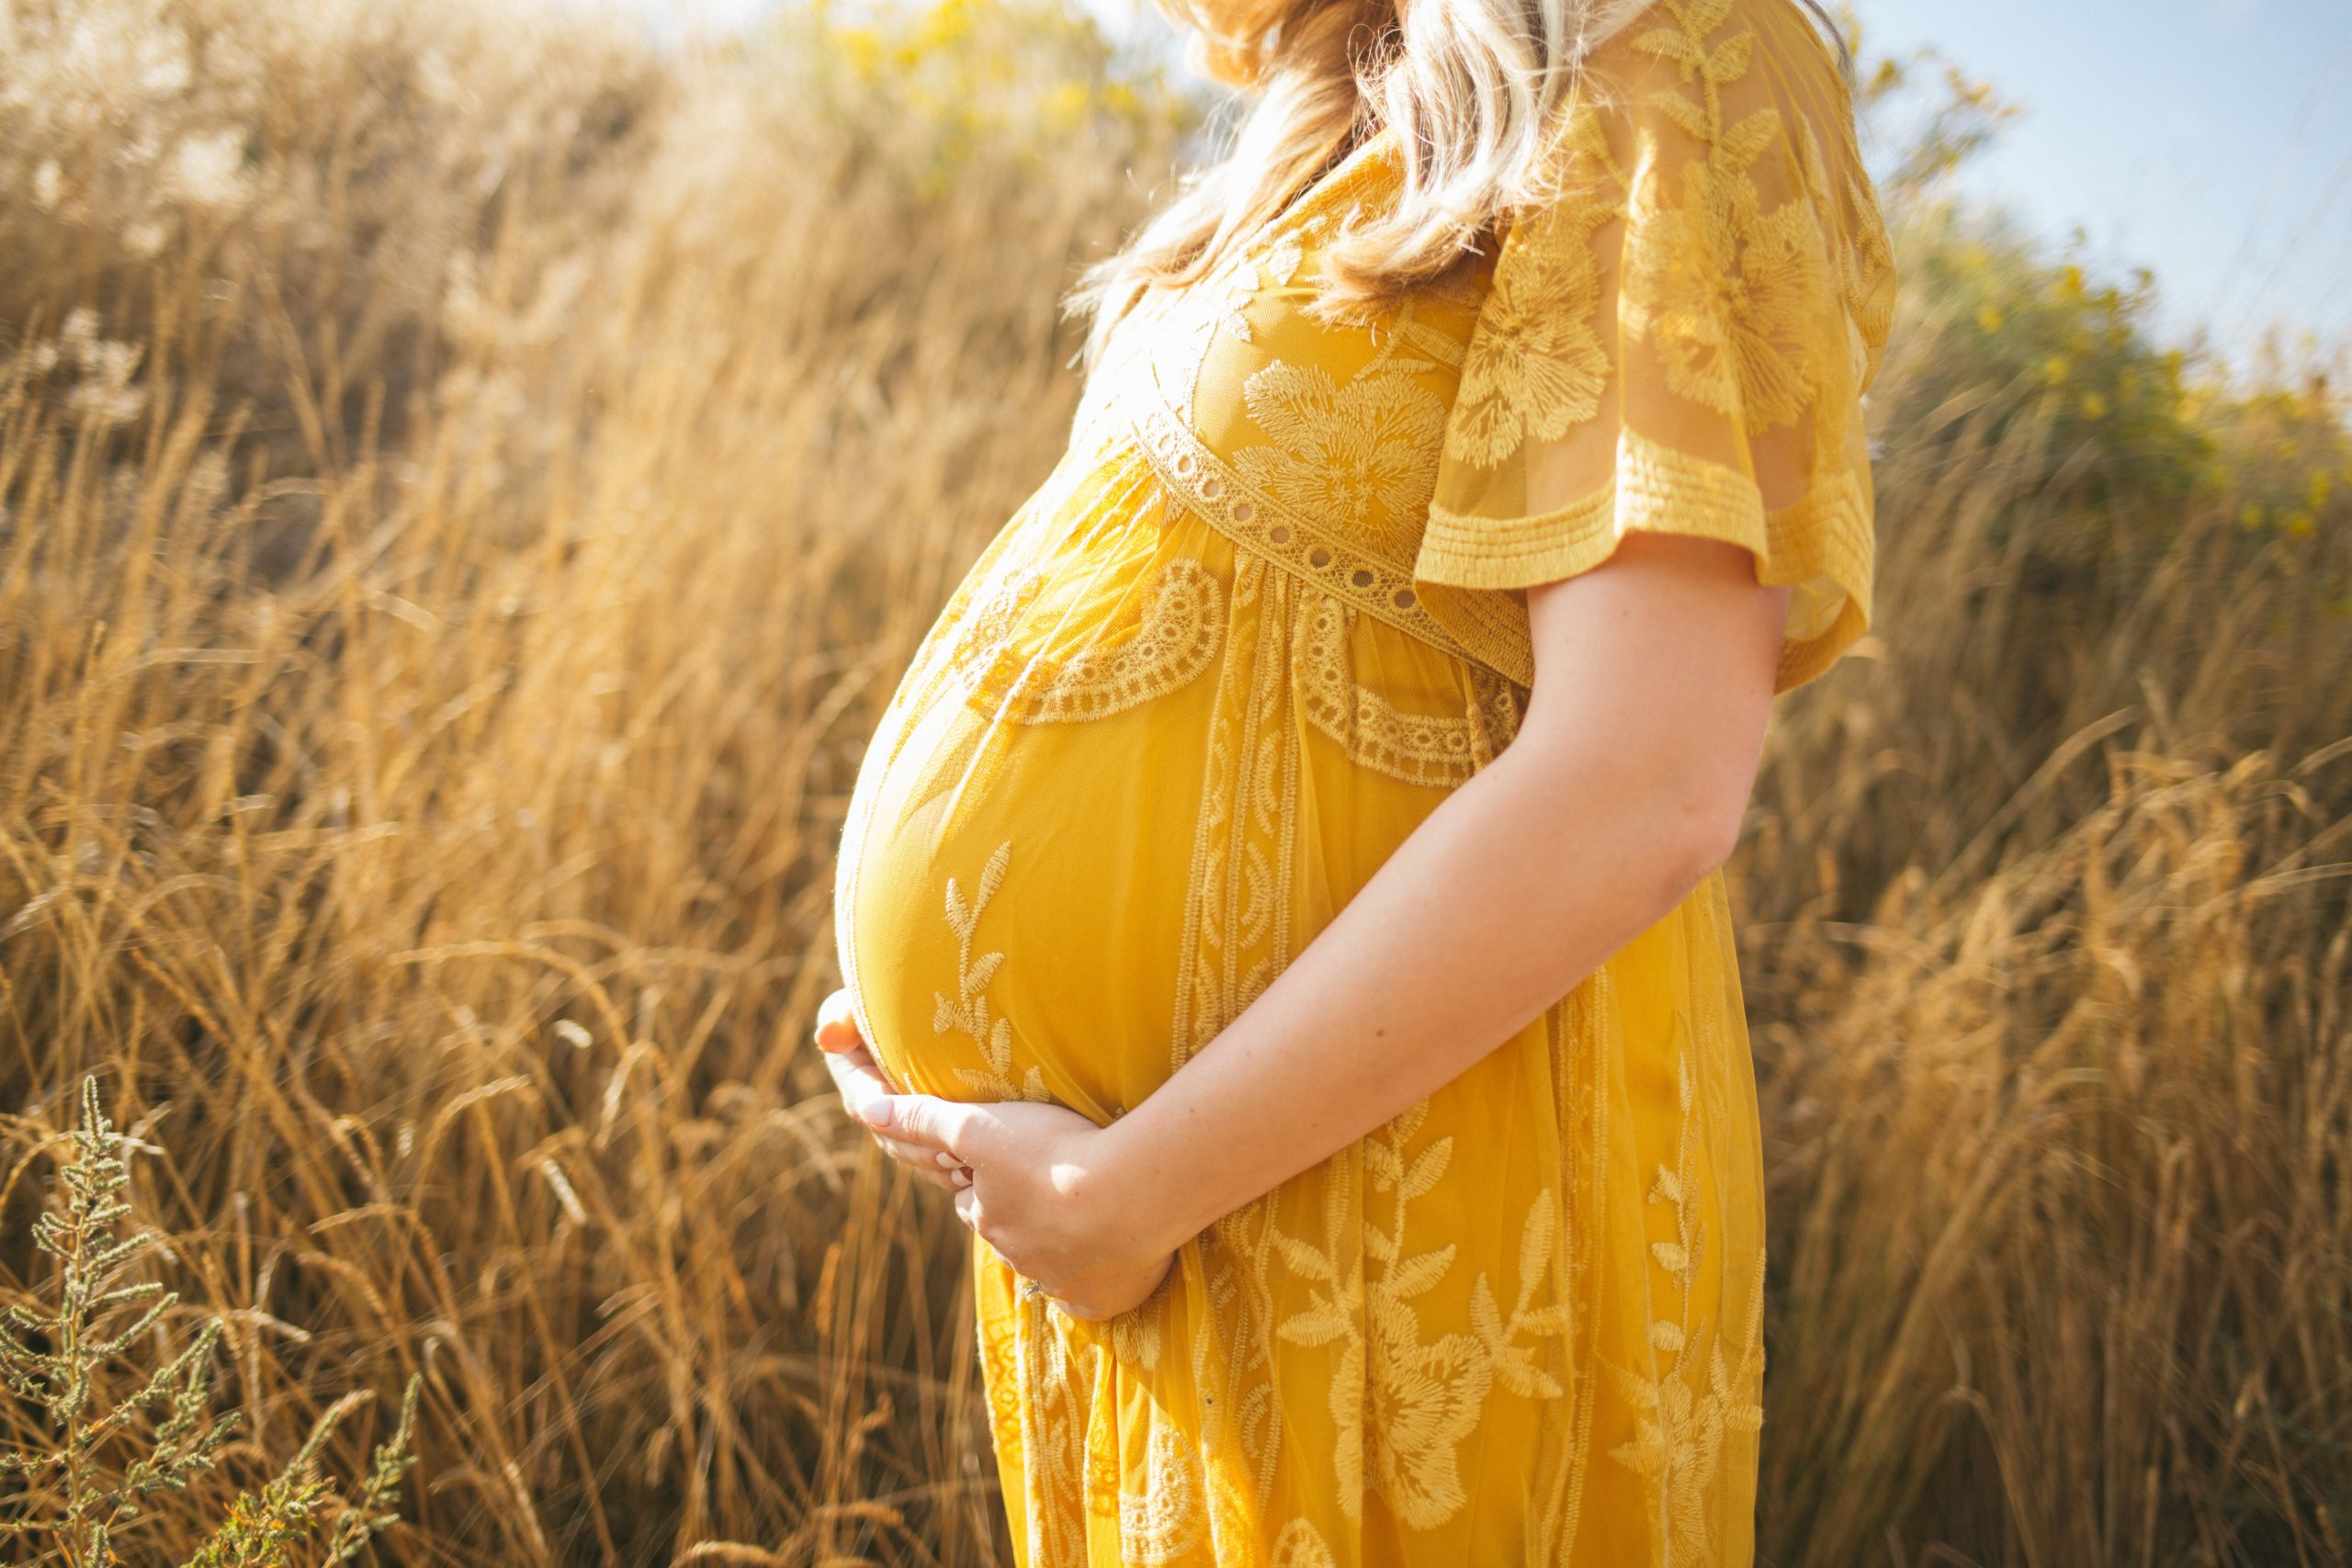 nutrition counseling for pregnant women